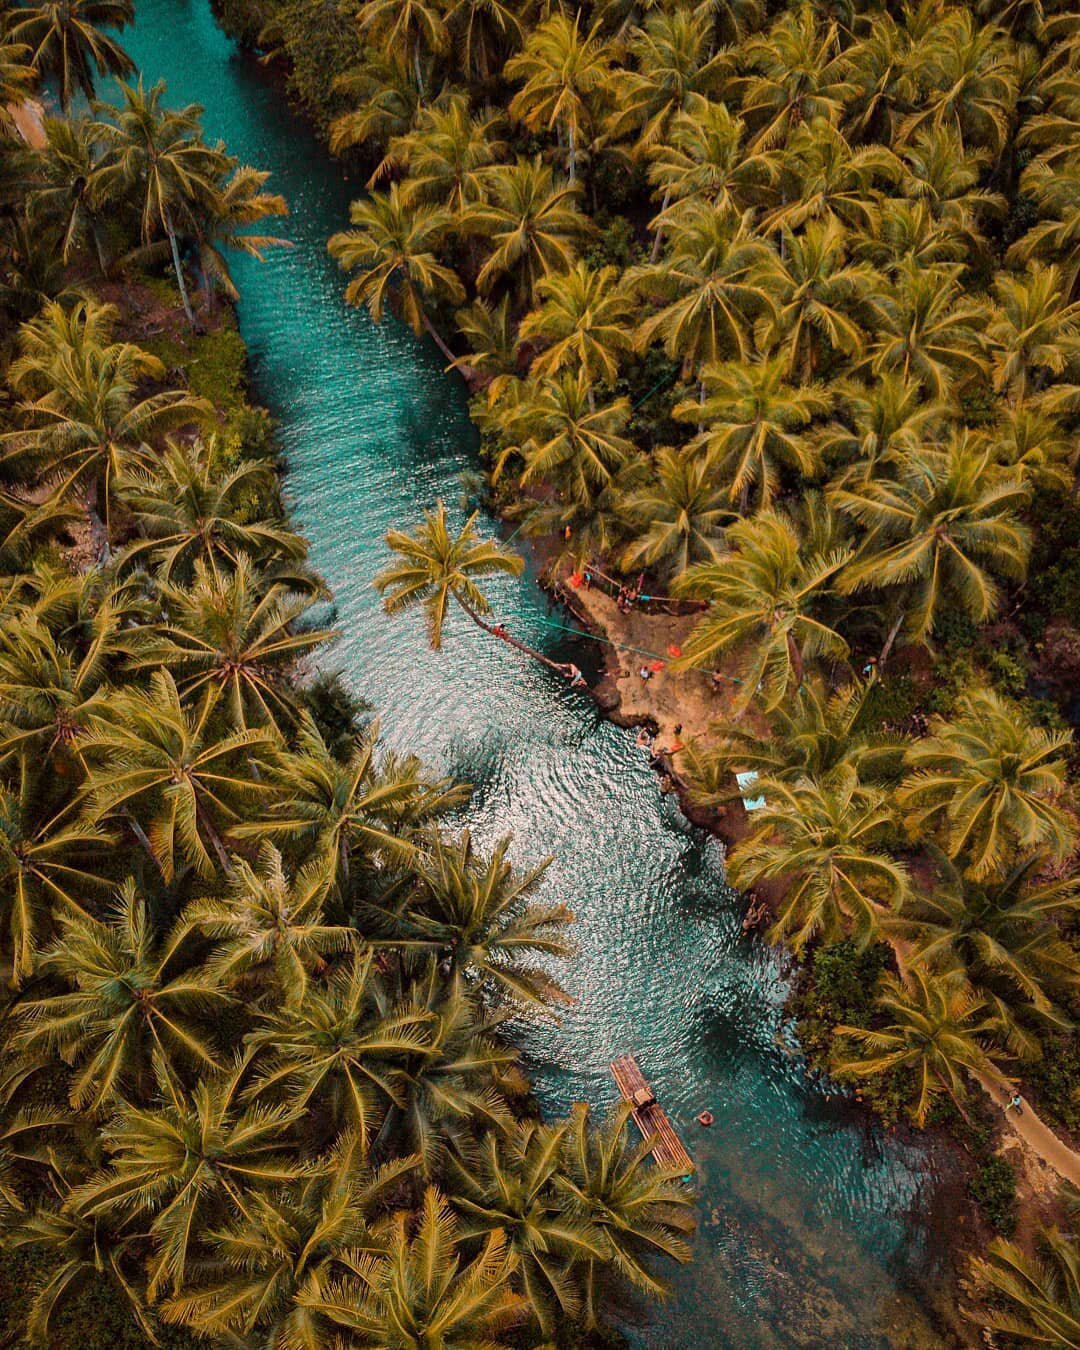 This place was so much fun 🌴 .
.
.
#lensbible #dji #dronegear #droneofficial #dronebois #viewbug #topdronephoto #lensbible #droneheroes #drone #djiglobal #stayandwander #fromwhereidrone #voyaged #dronespace #drone #droneoftheday #skypixel #iamdji #n